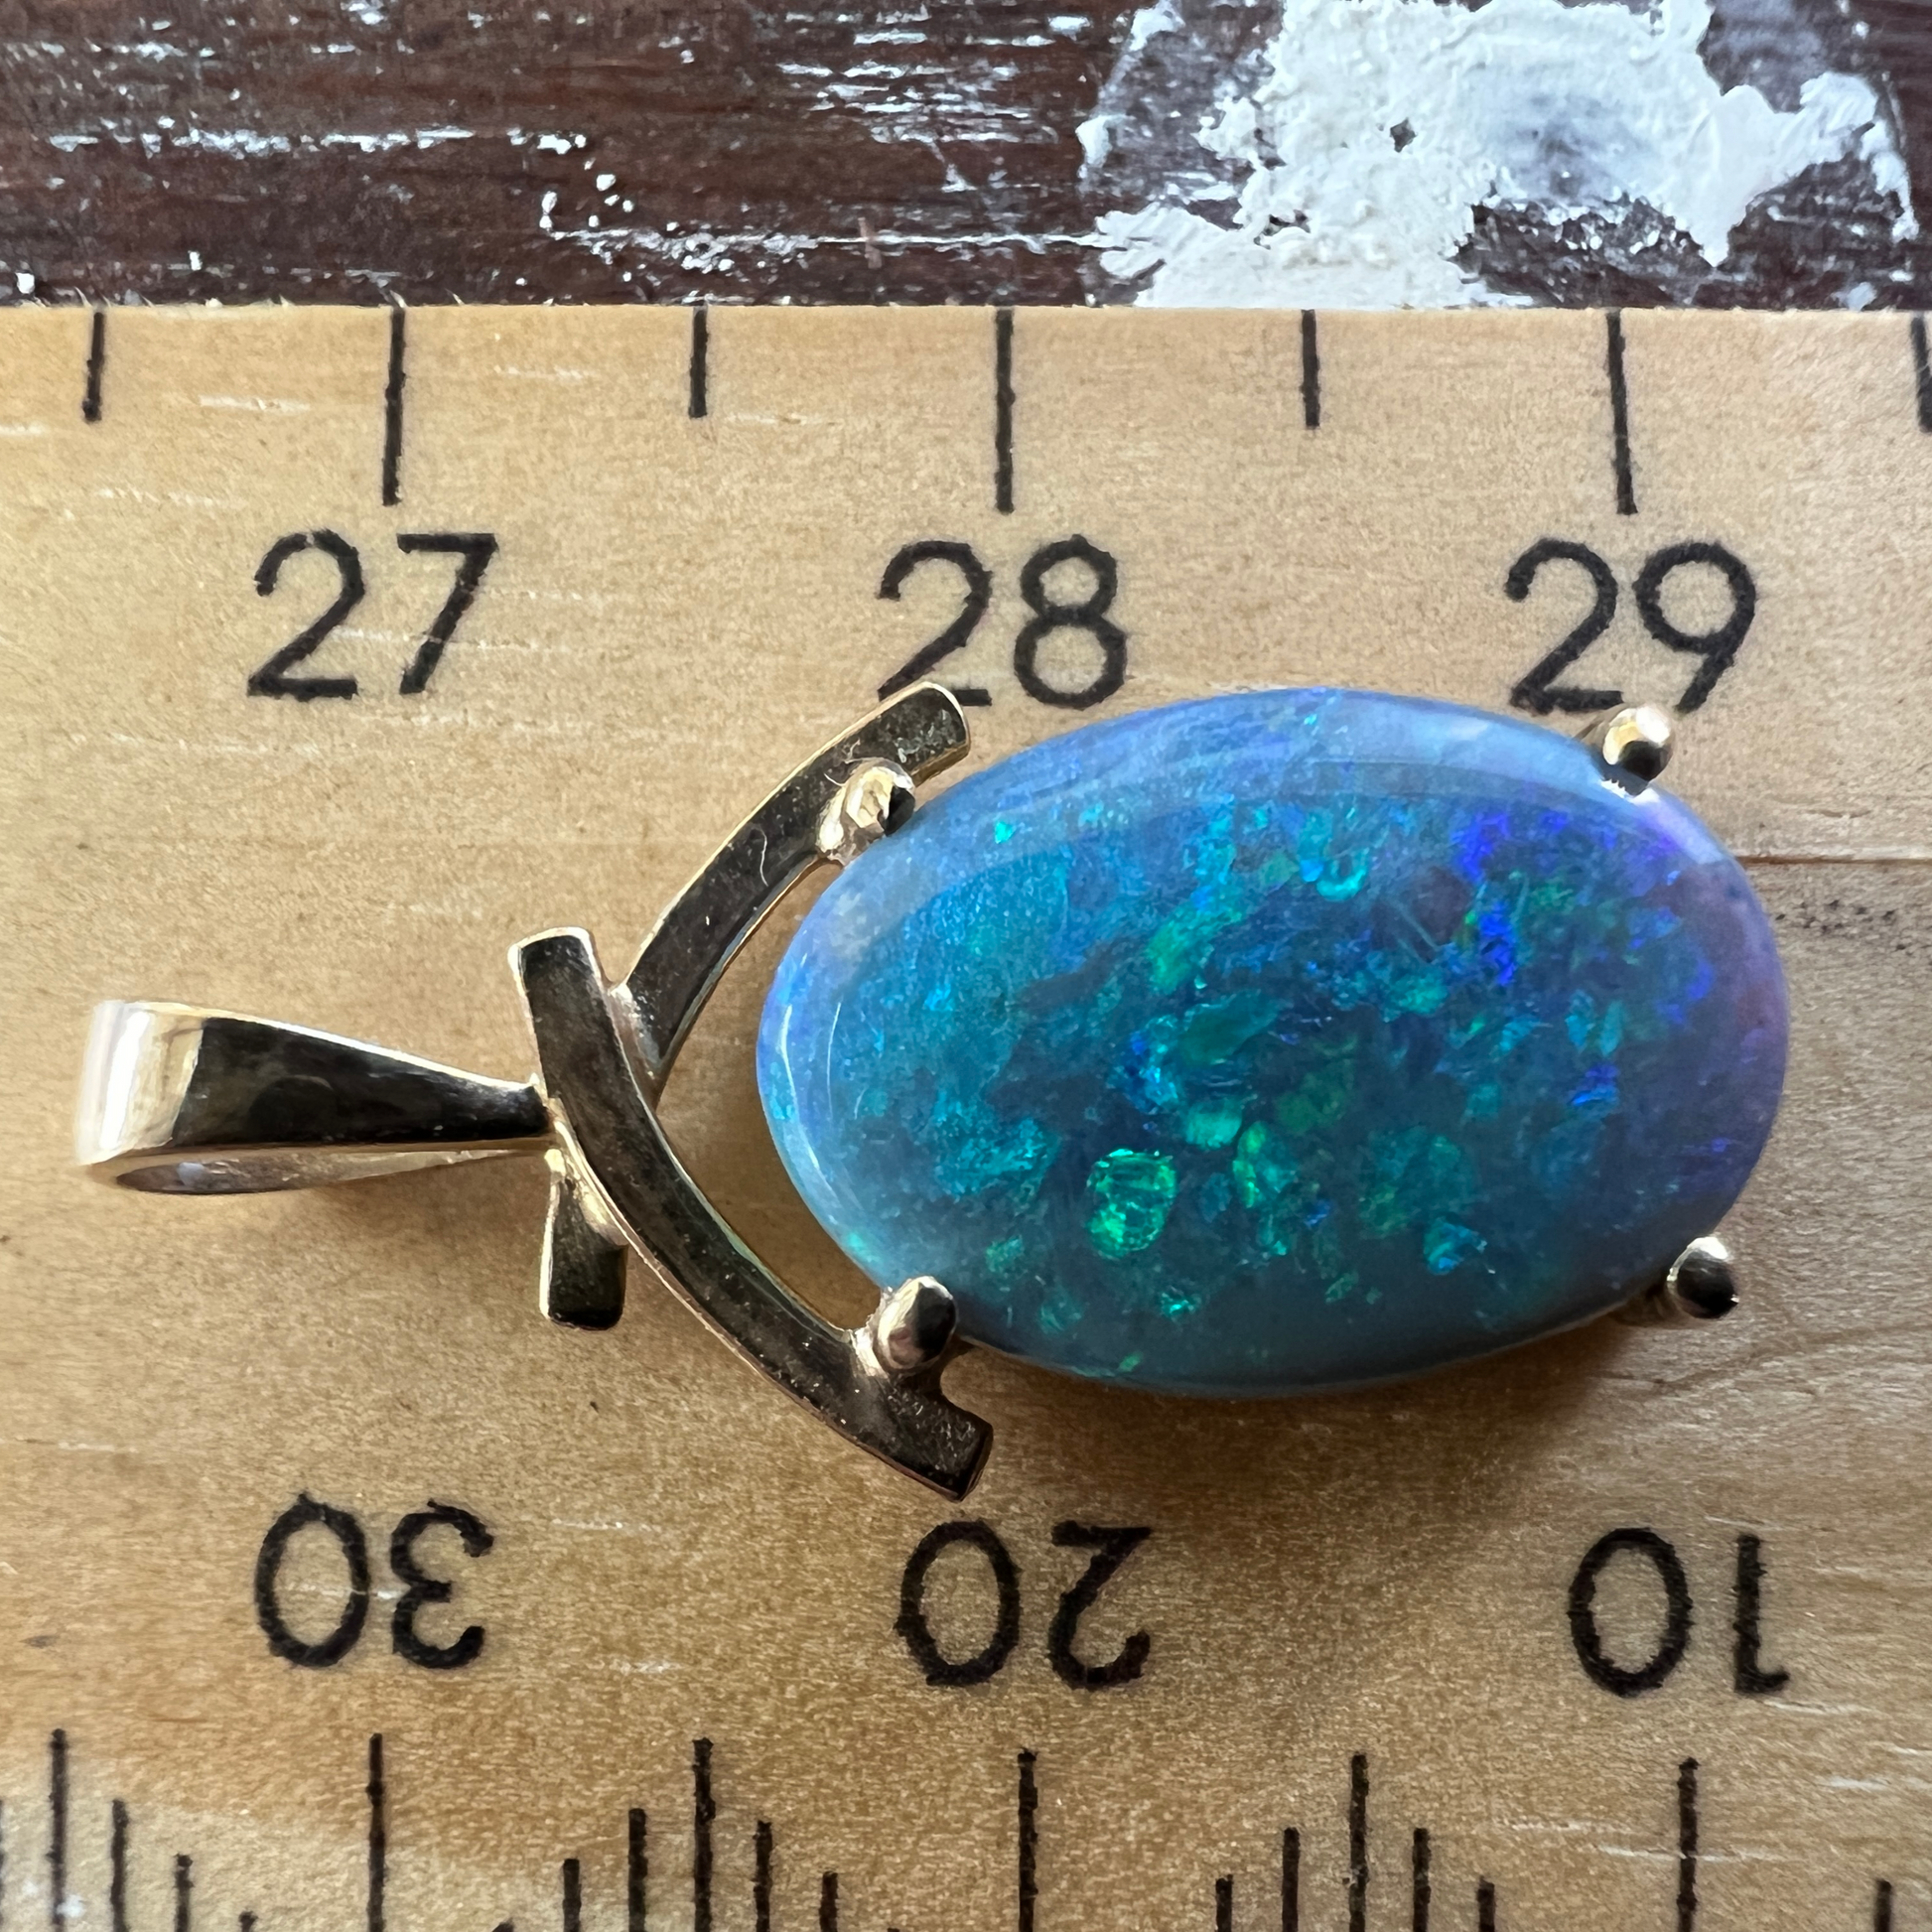 Beautifully cut Lightning Ridge Crystal opal displaying awesome greens. Set in a 14ct gold pendant. Cut and polished by Bill Johnson. Priced to sell.